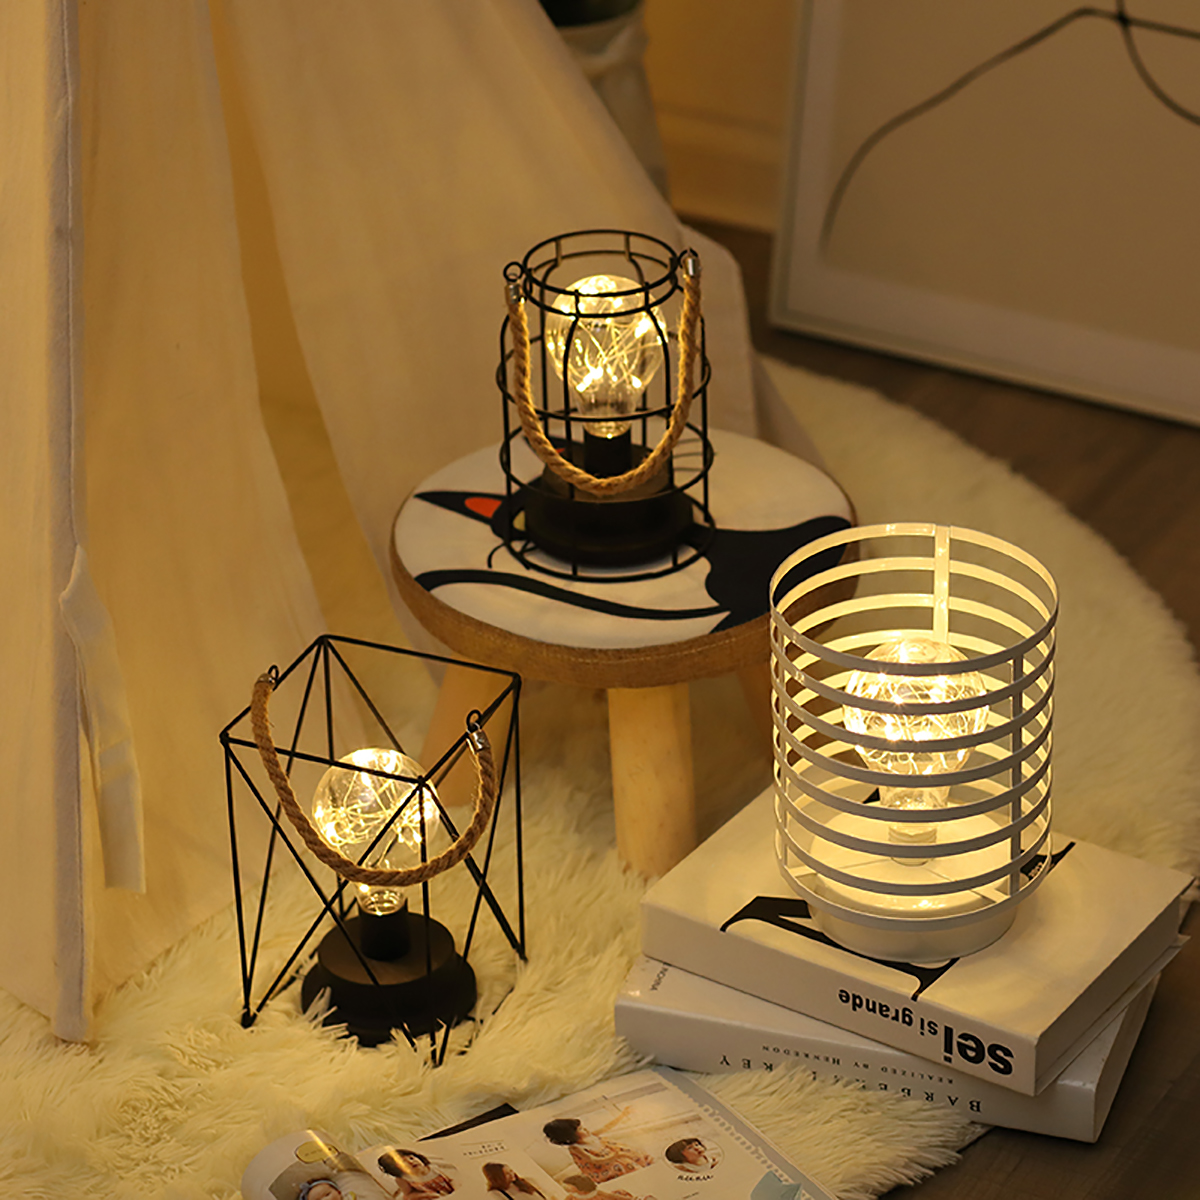 Retro-Cage-Light-Mini-Metal-Battery-Powered-LED-Bulb-Lamp-for-Living-Room-Bedroom-Kitchen-Wedding-Ch-1733946